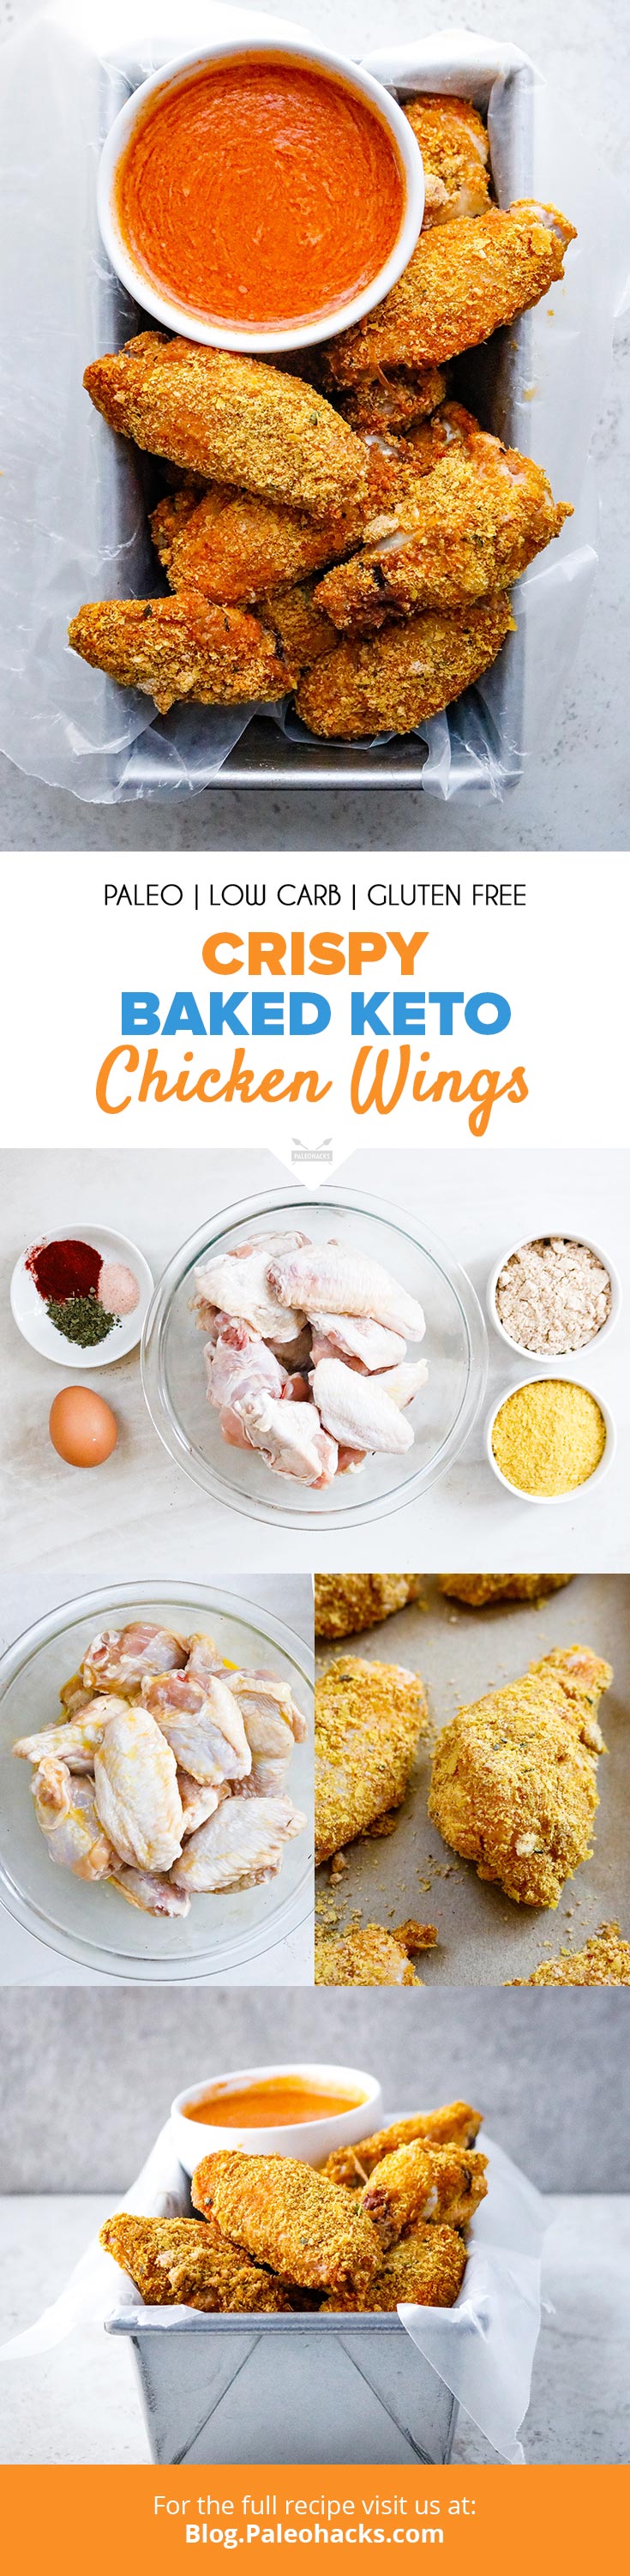 Snack into these Crispy Keto Chicken Wings made with nutritional yeast and crunchy almond meal. So crunchy, you'll forget they're oven baked!